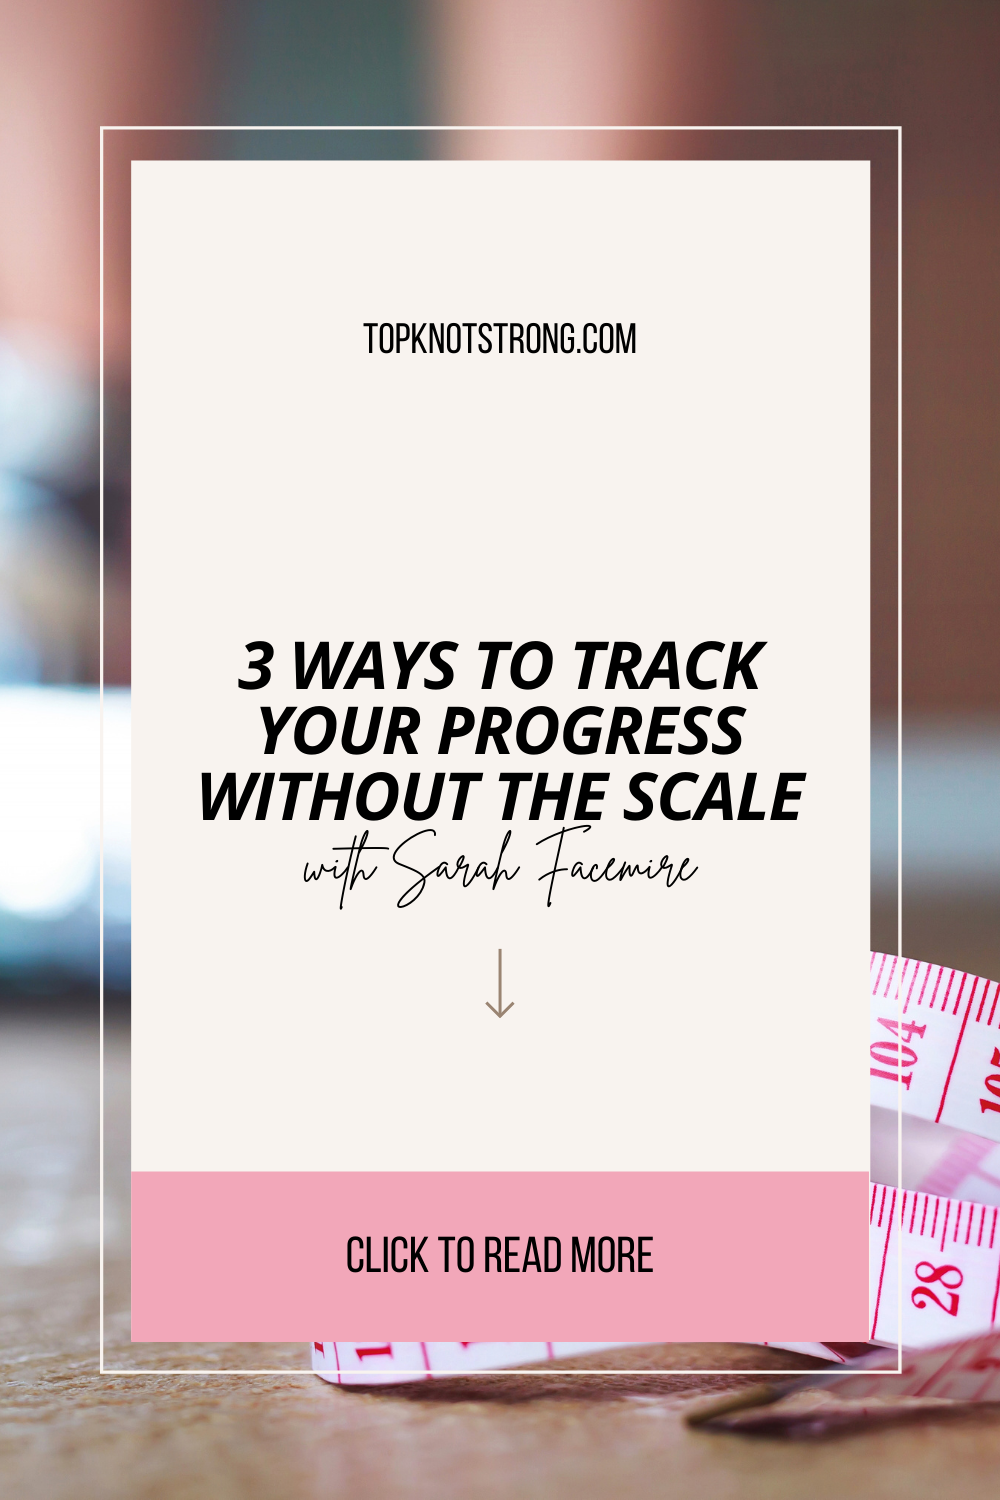 Other Ways to Track Your Progress Besides The Scale